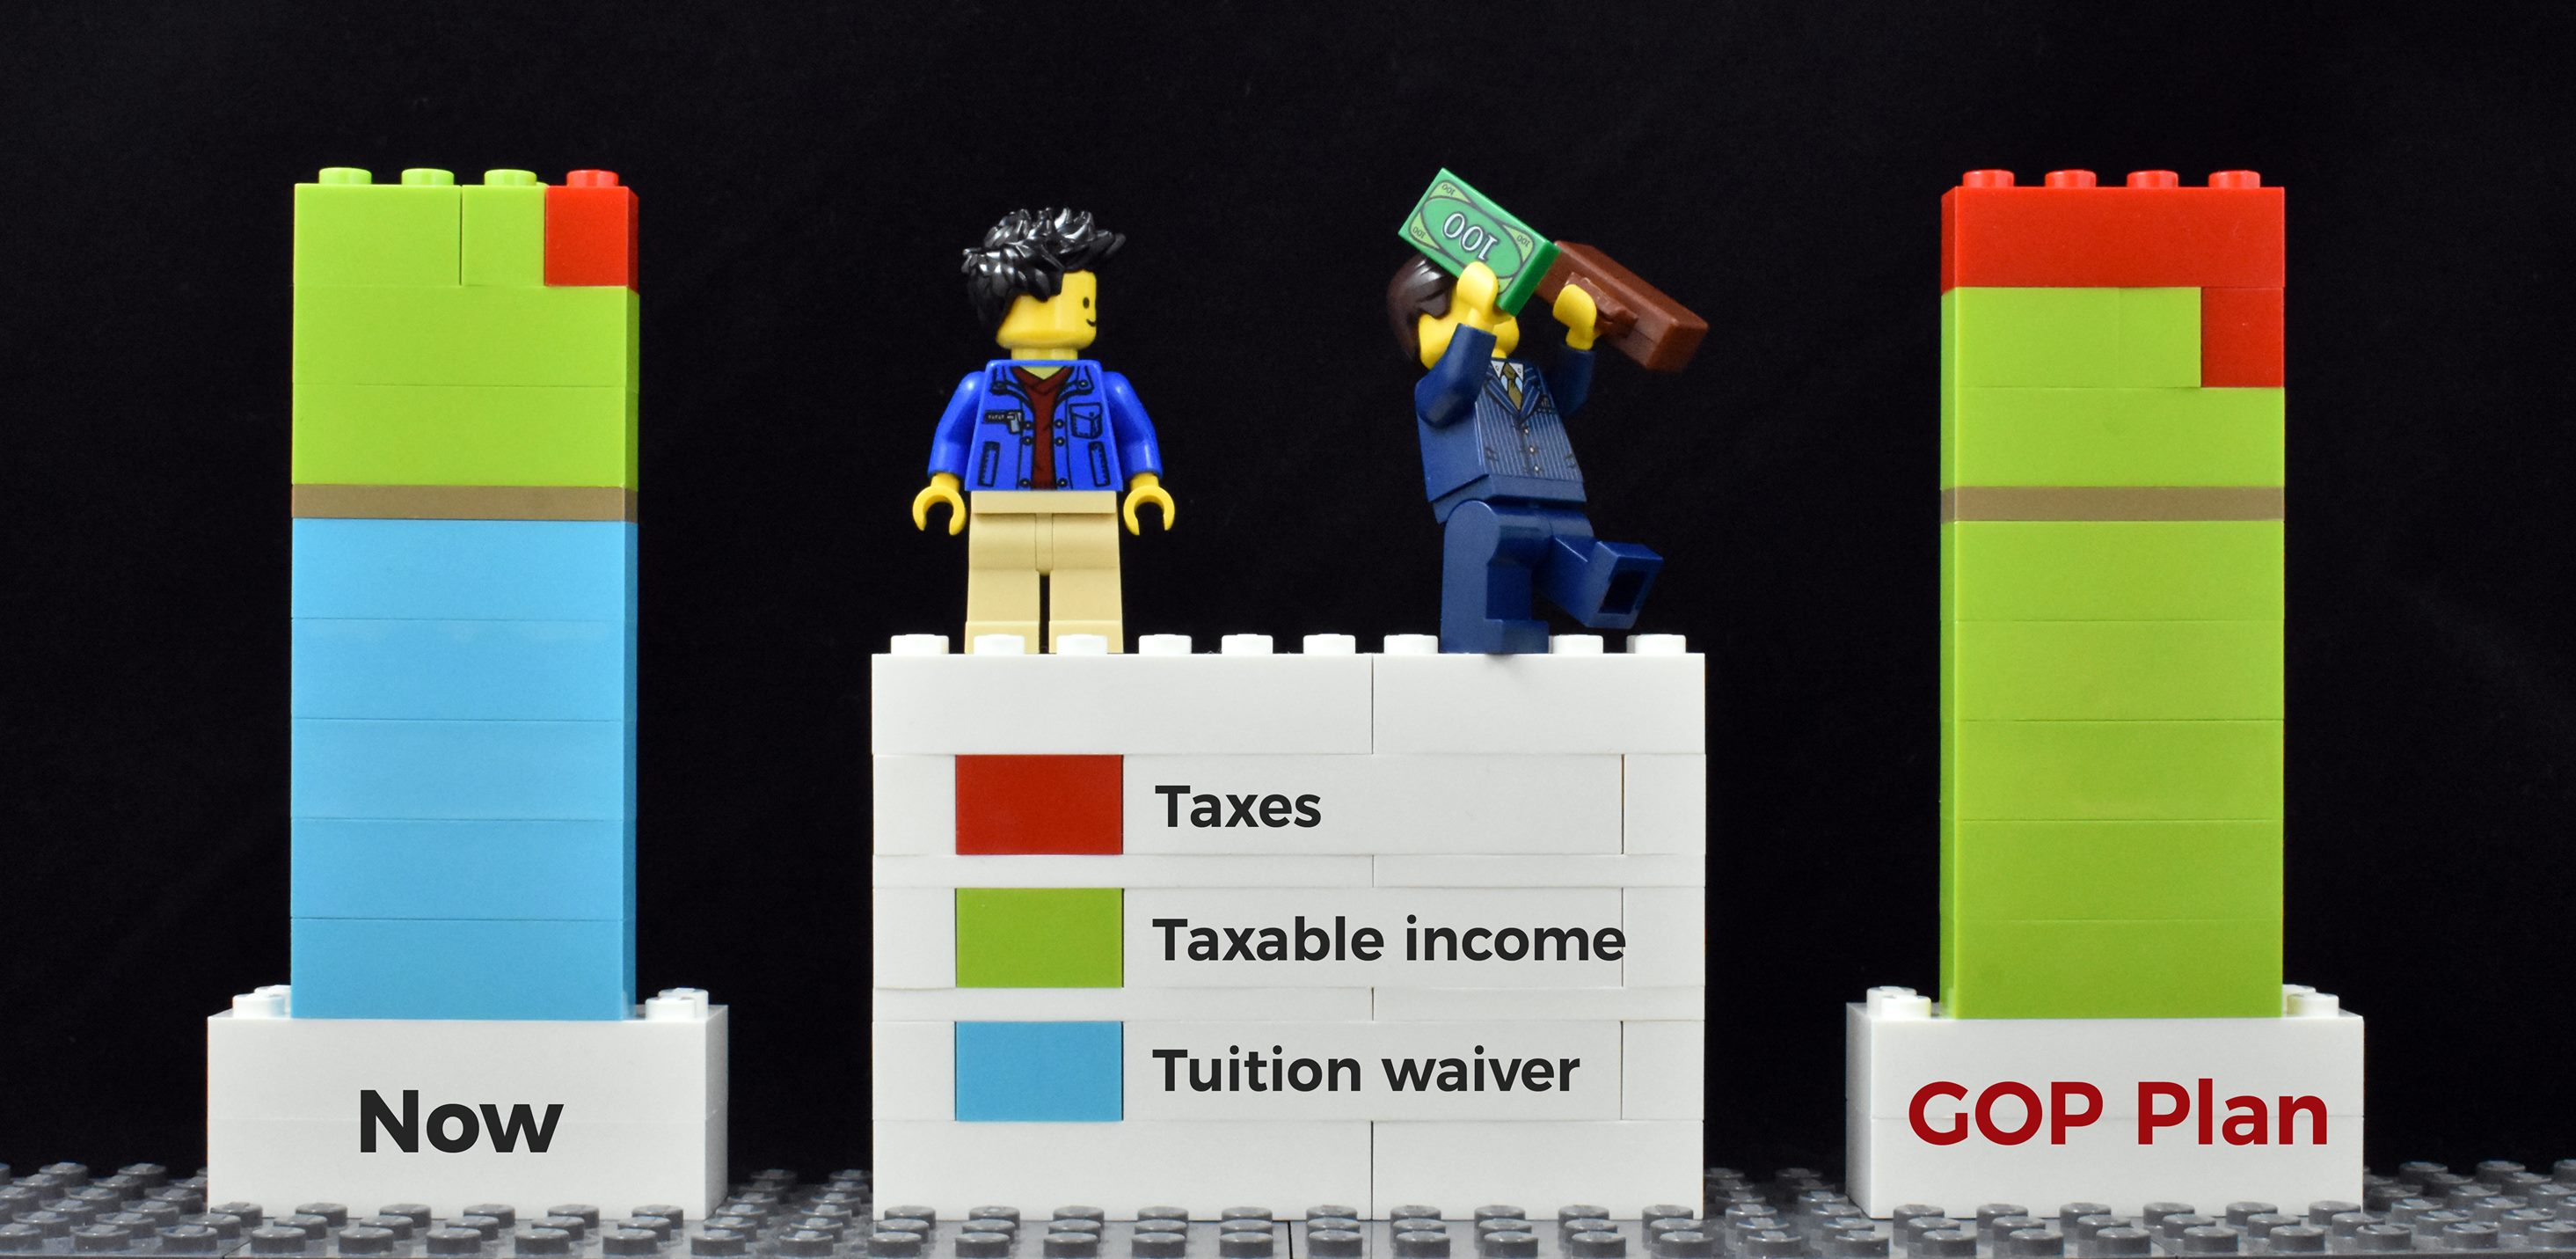 lego tuition waiver tax